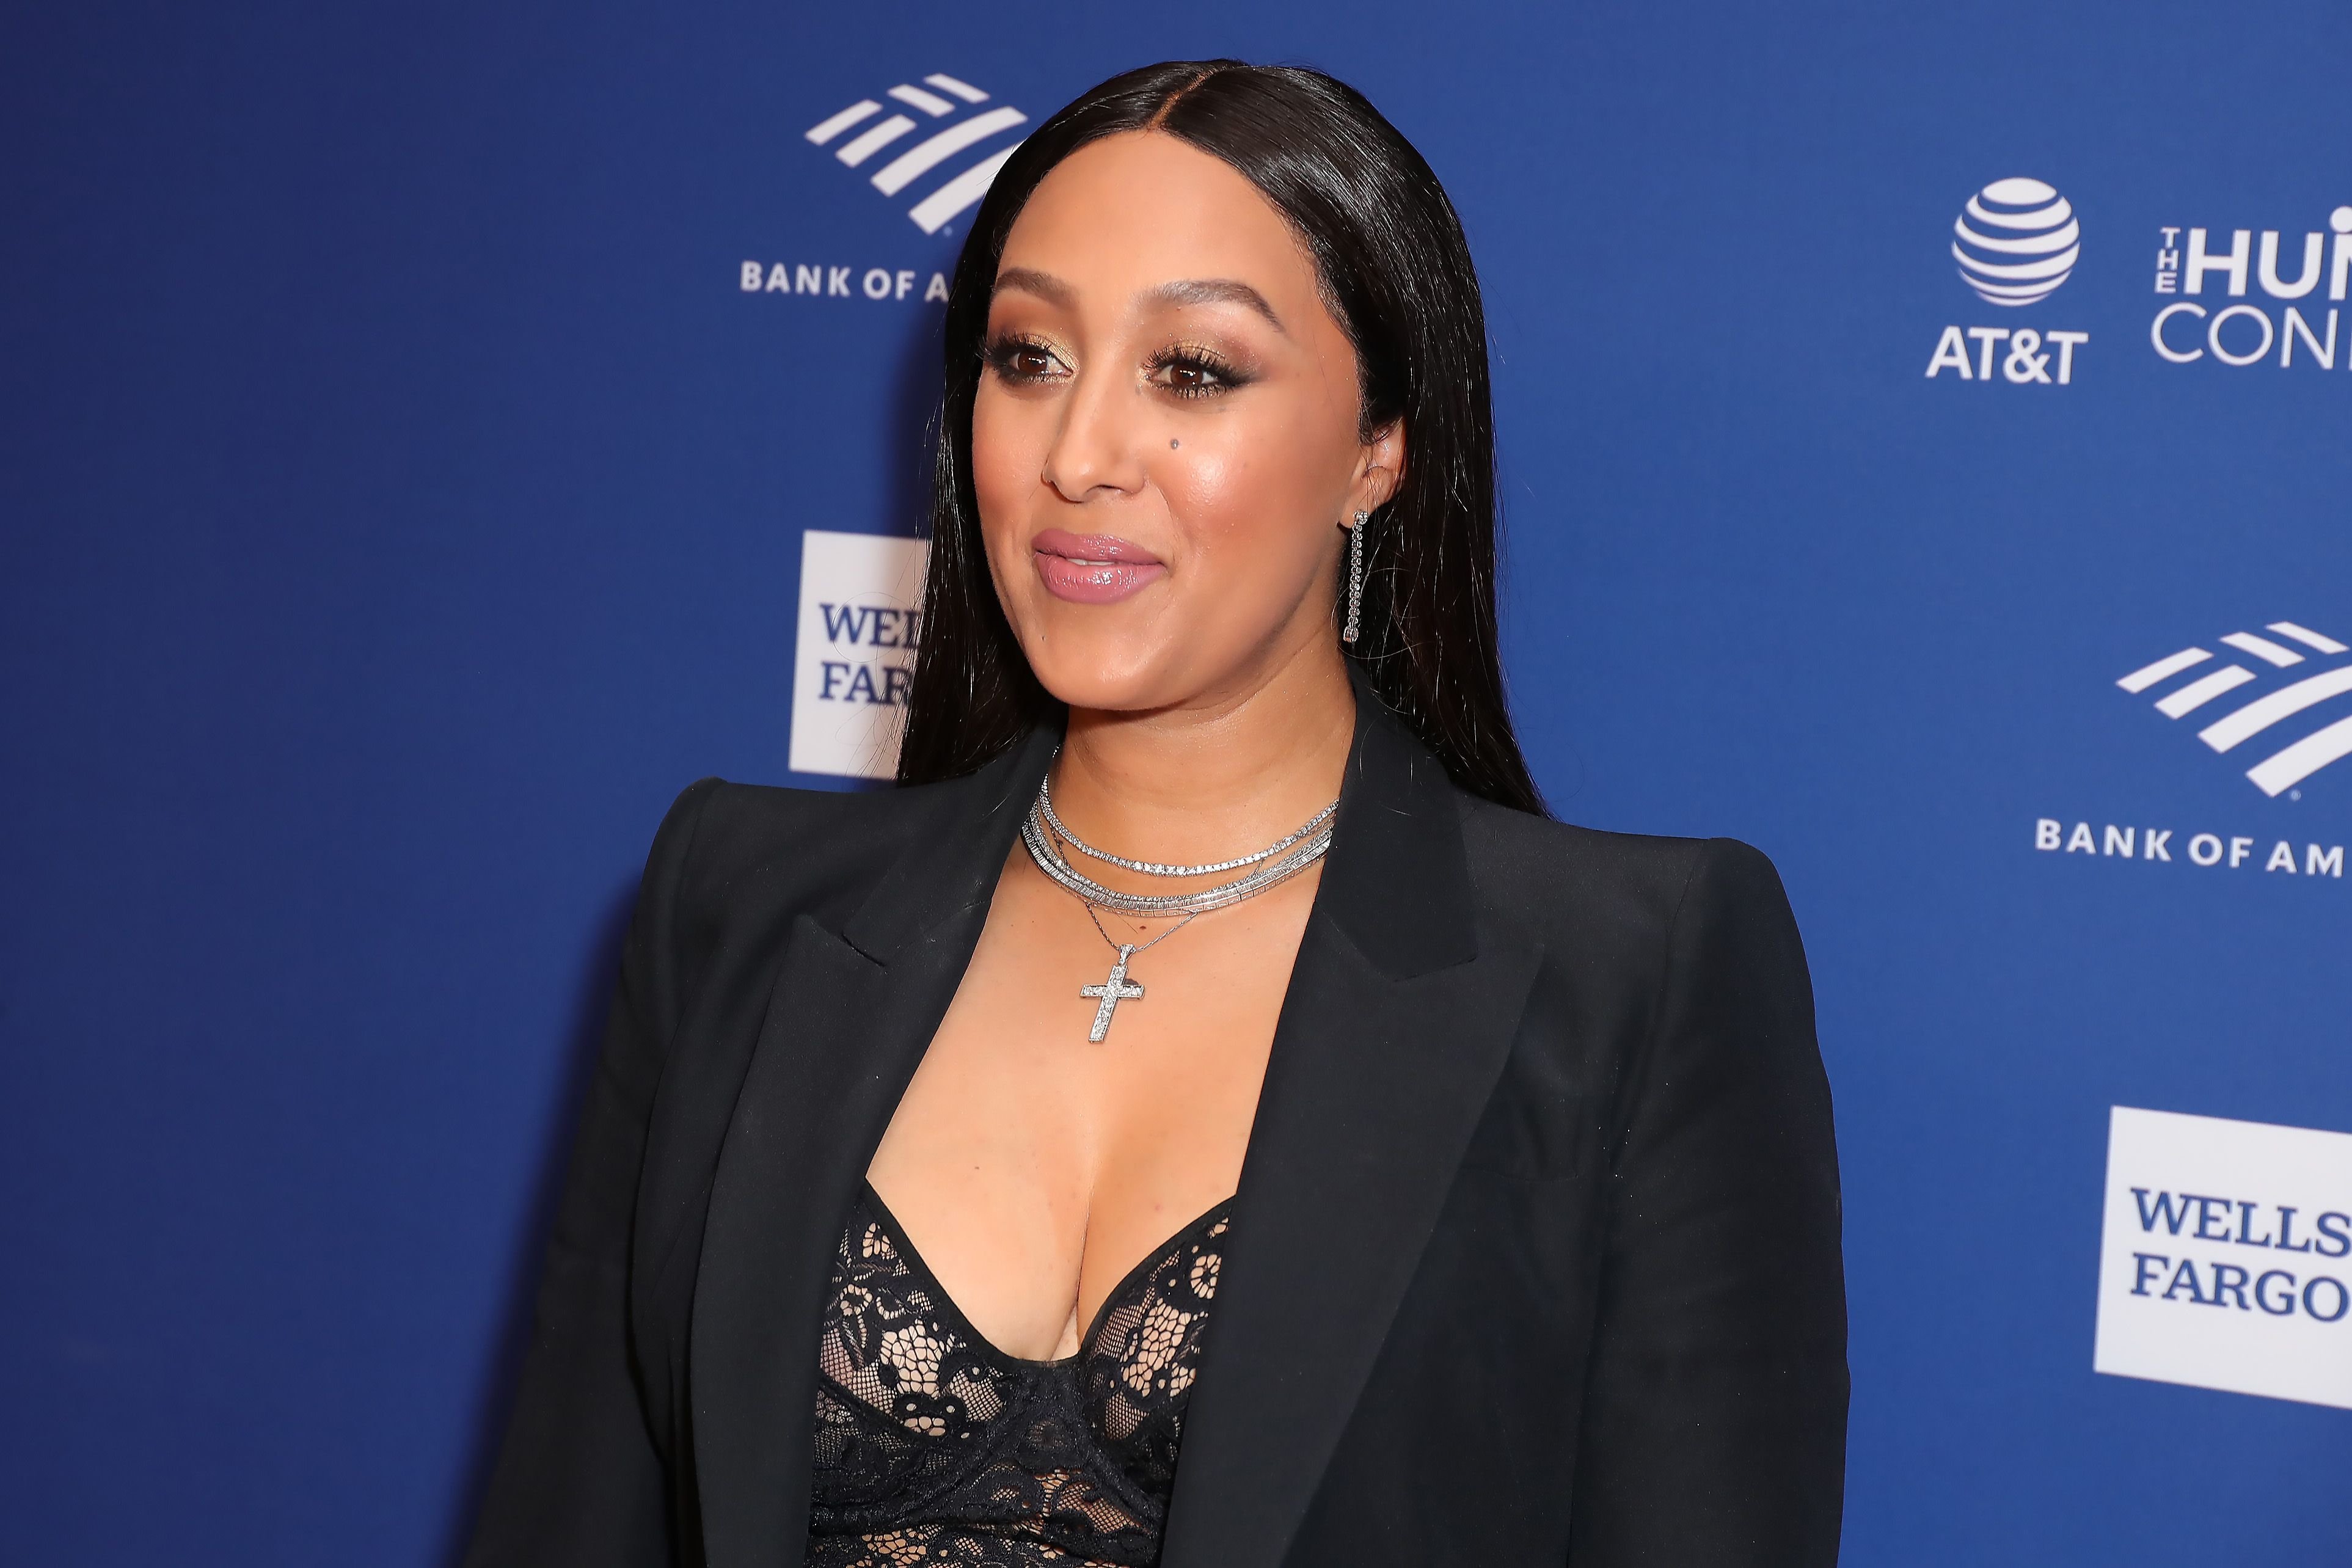 Tamera Mowry-Housley at the 51st NAACP Image Awards - non-televised awards dinner - arrivals on February 21, 2020 in Hollywood, California | Photo: Getty Images